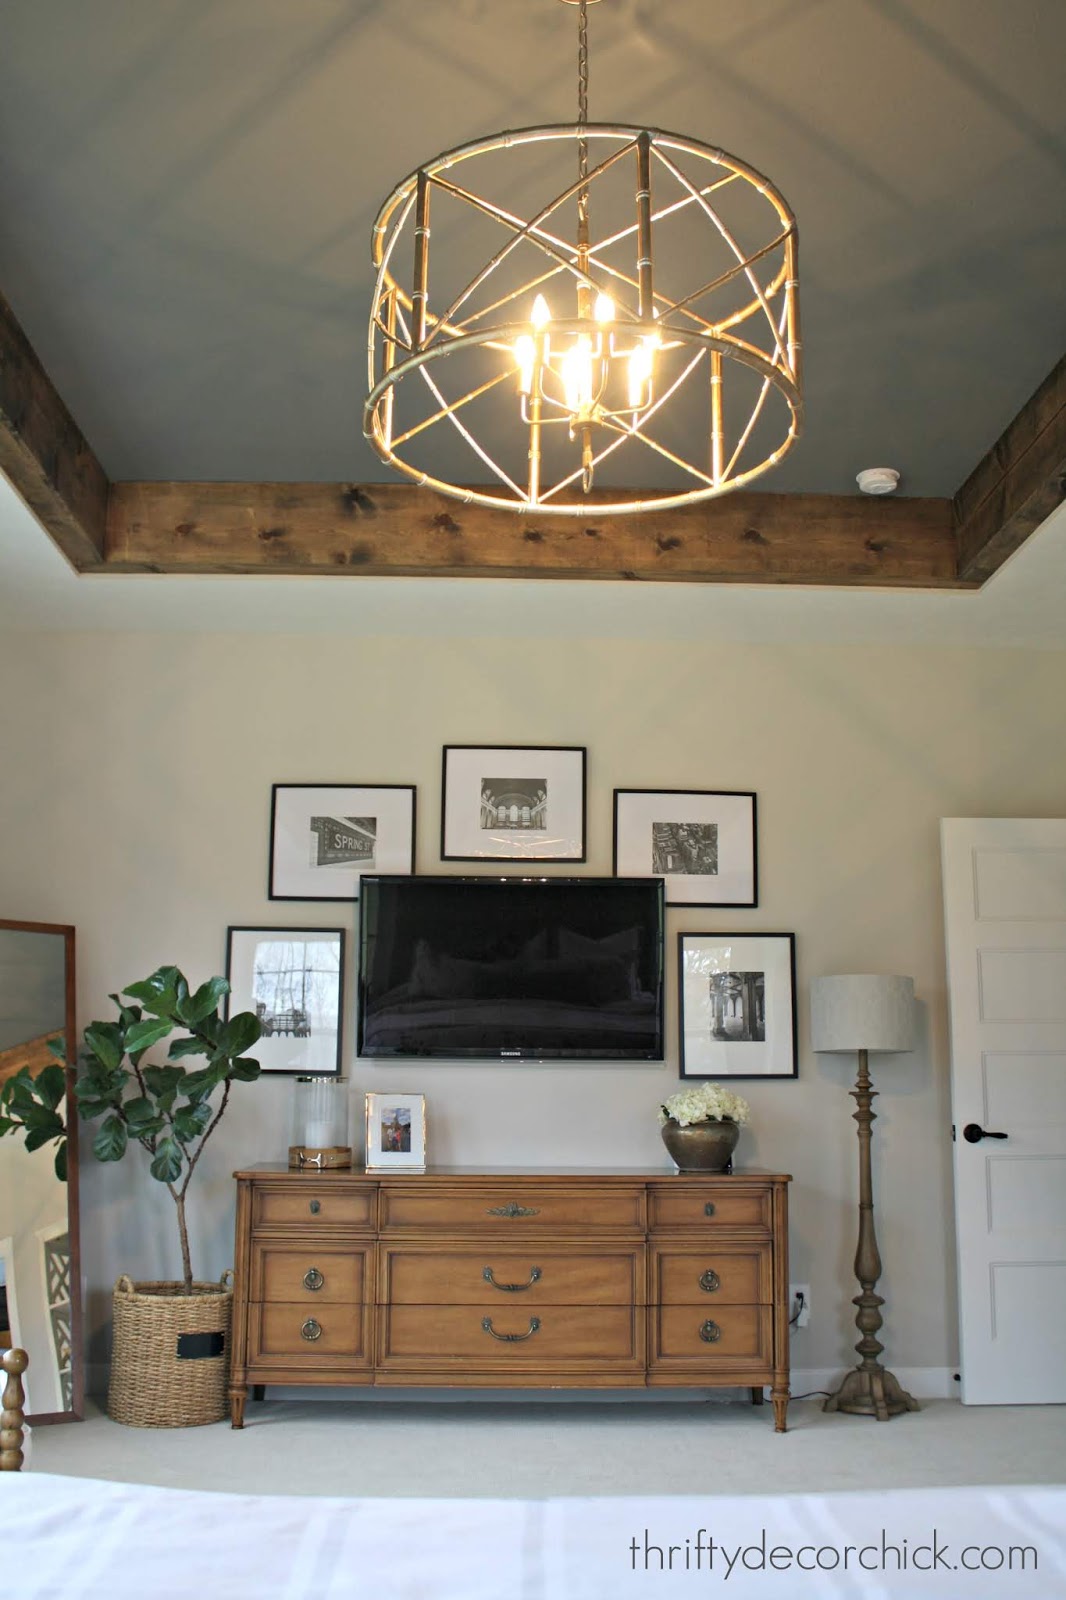 Cozy Tray Ceiling Makeover With Thrifty Decor Chick Sarah